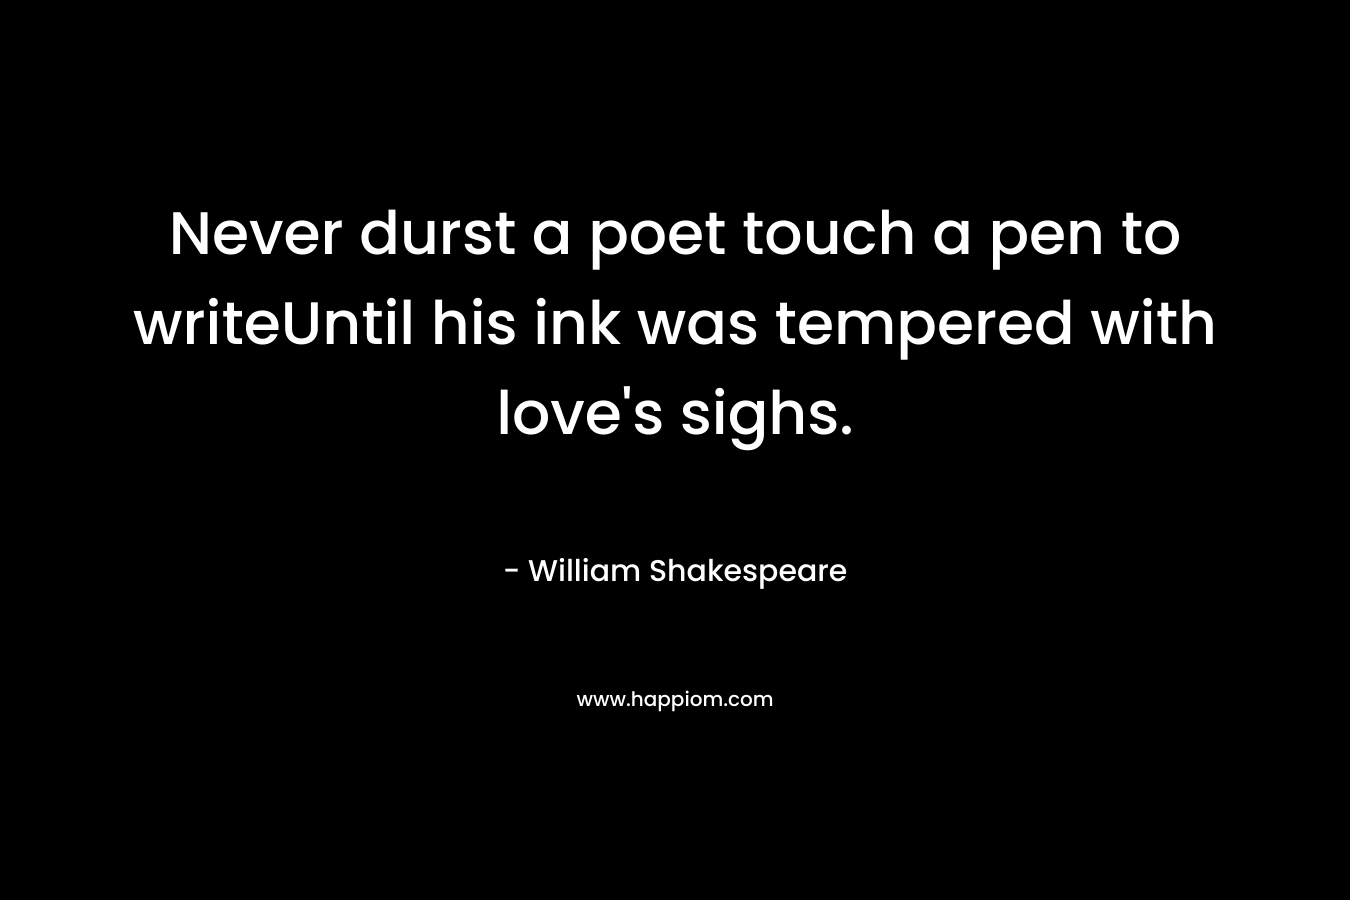 Never durst a poet touch a pen to writeUntil his ink was tempered with love's sighs.